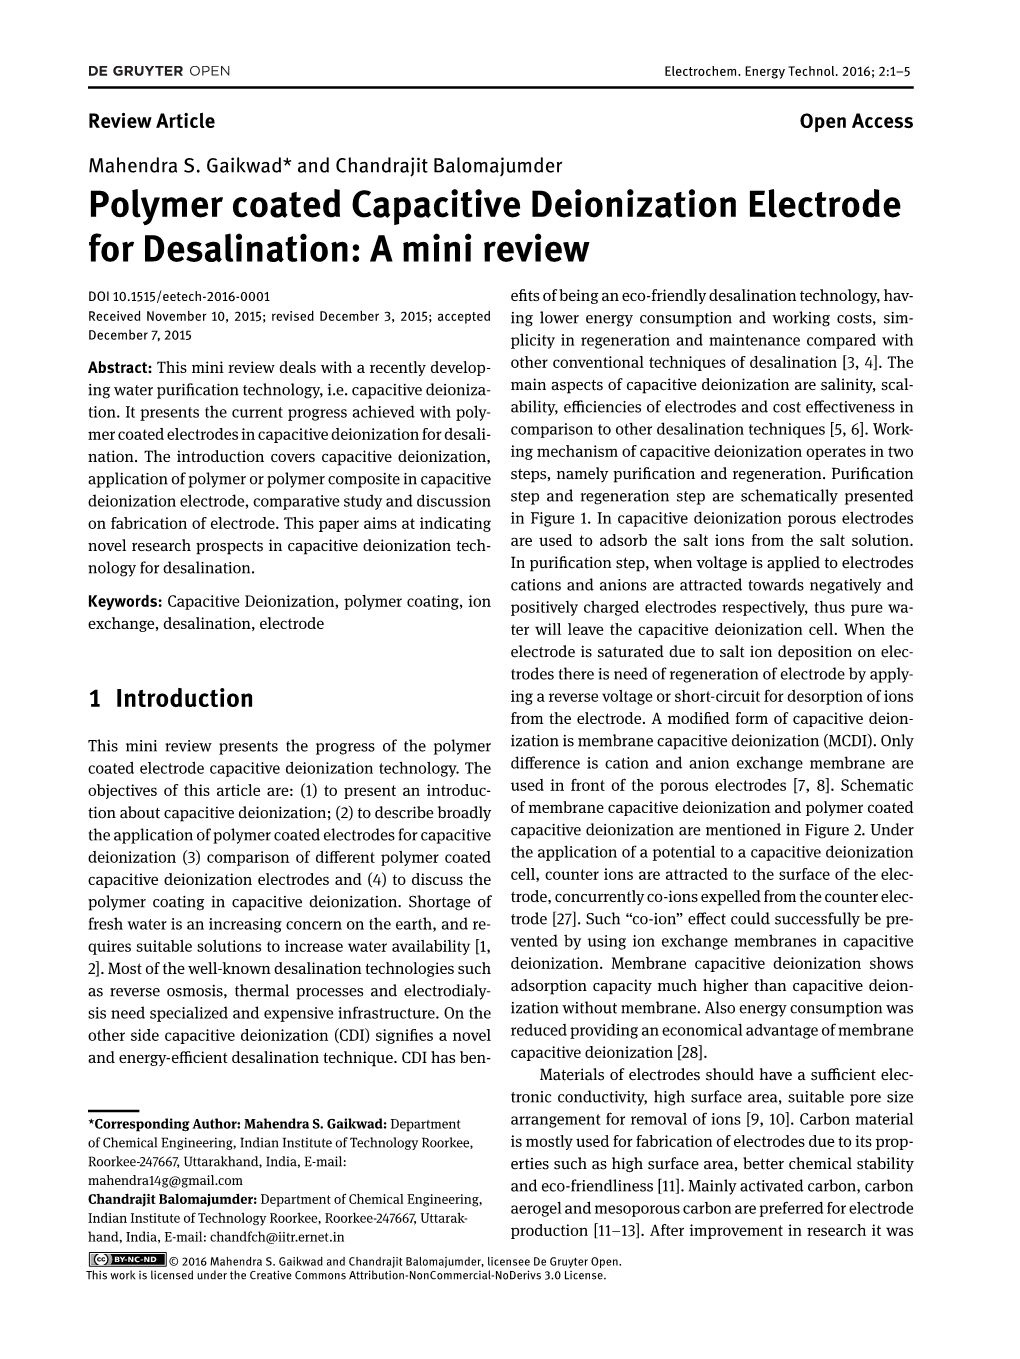 Polymer Coated Capacitive Deionization Electrode for Desalination: a Mini Review